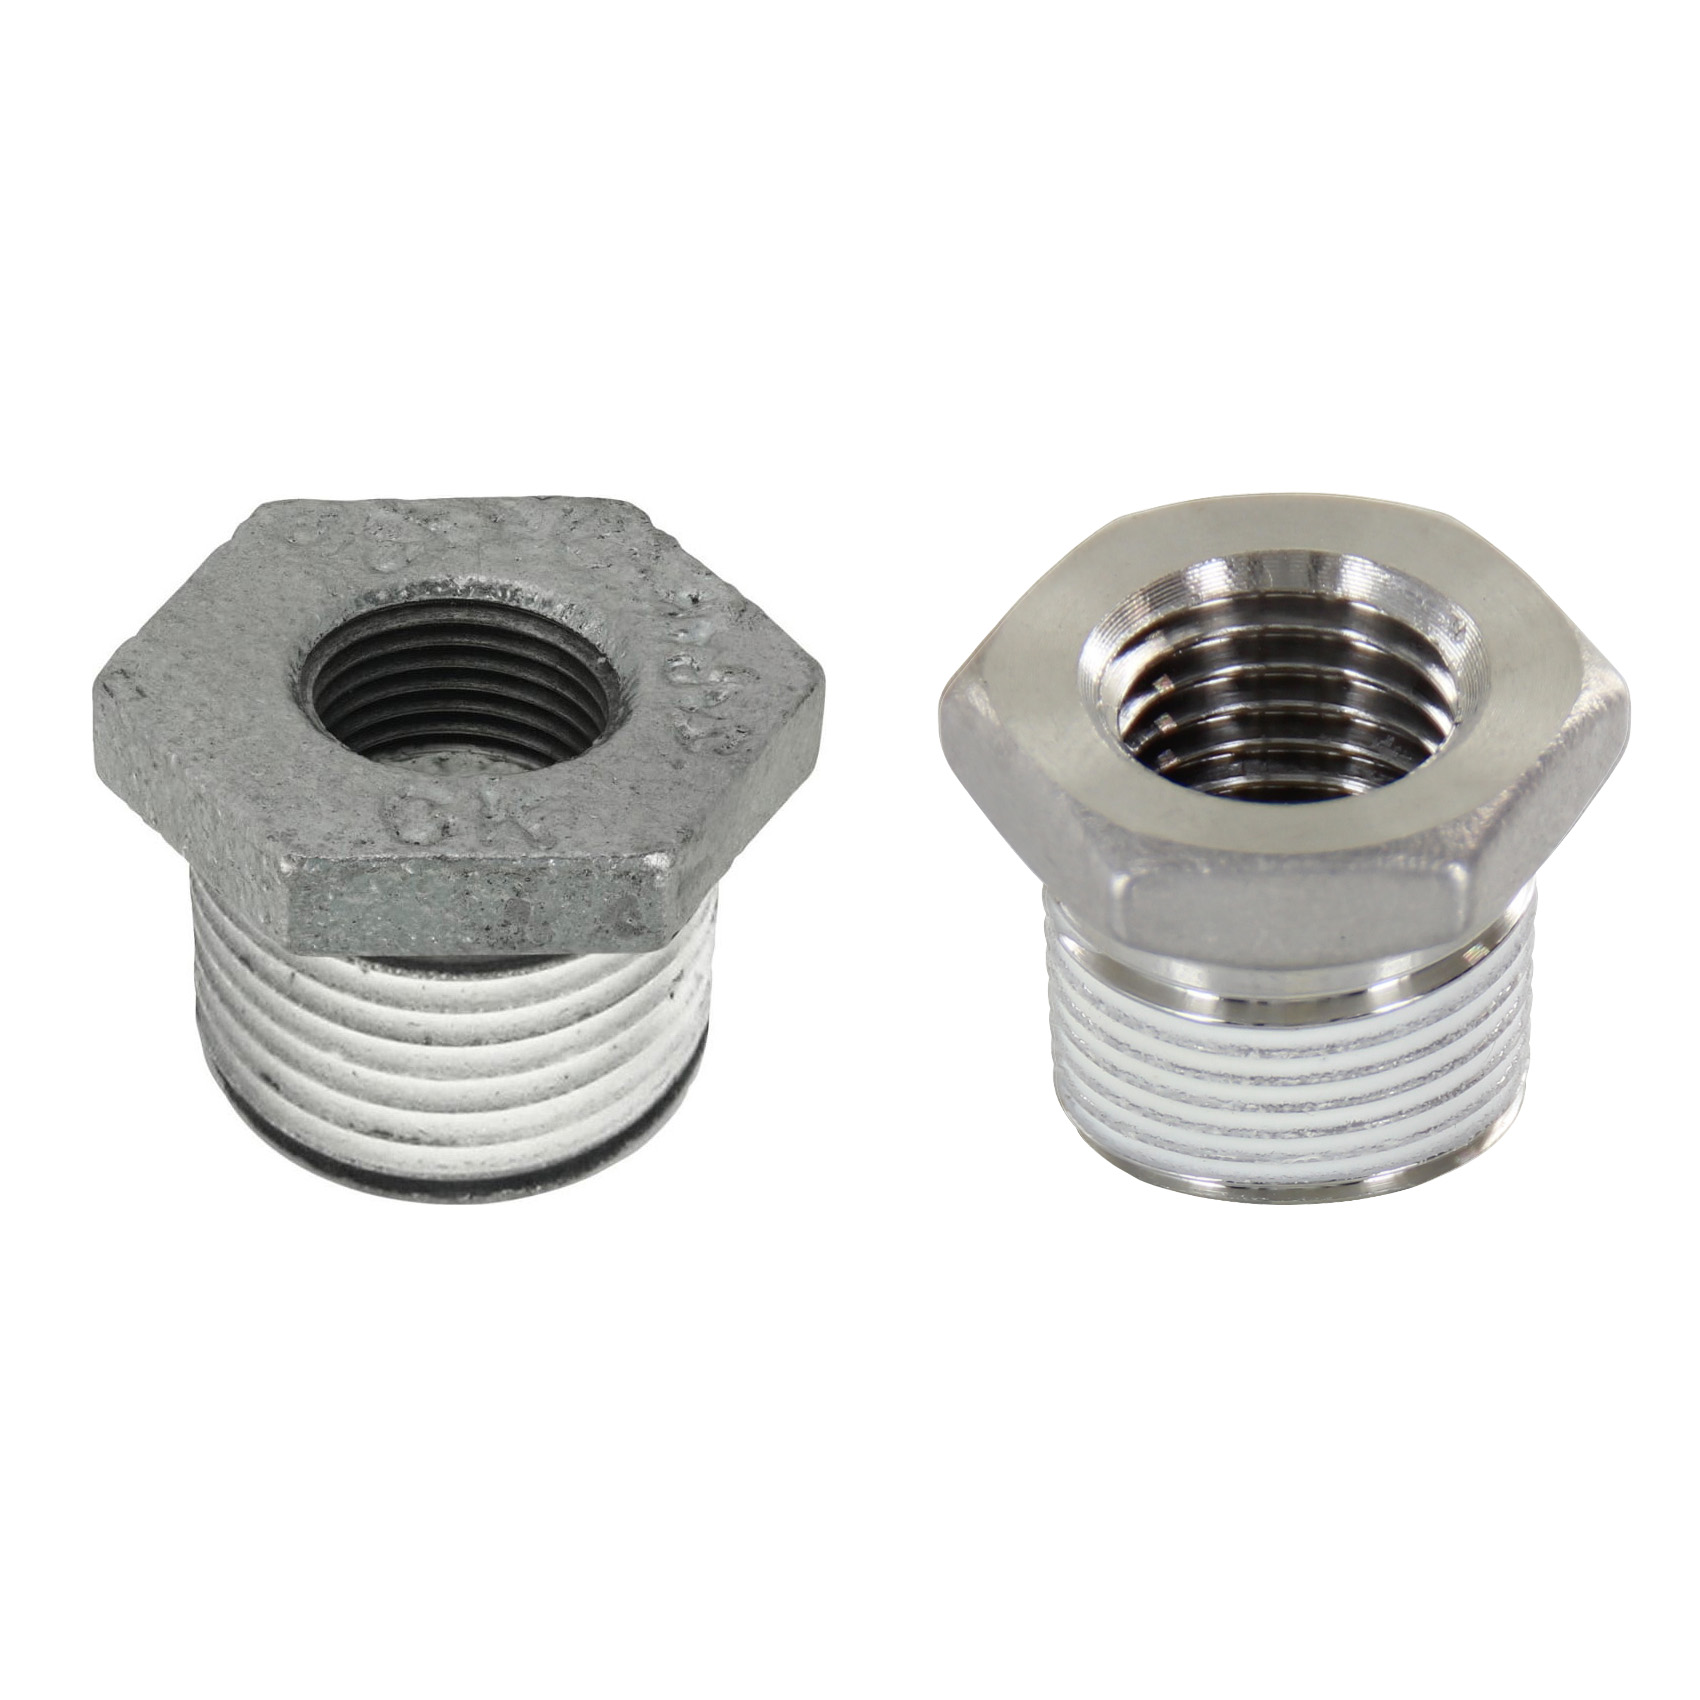 Low Pressure Fittings / With Seal Coating / Bushing SGCPB24